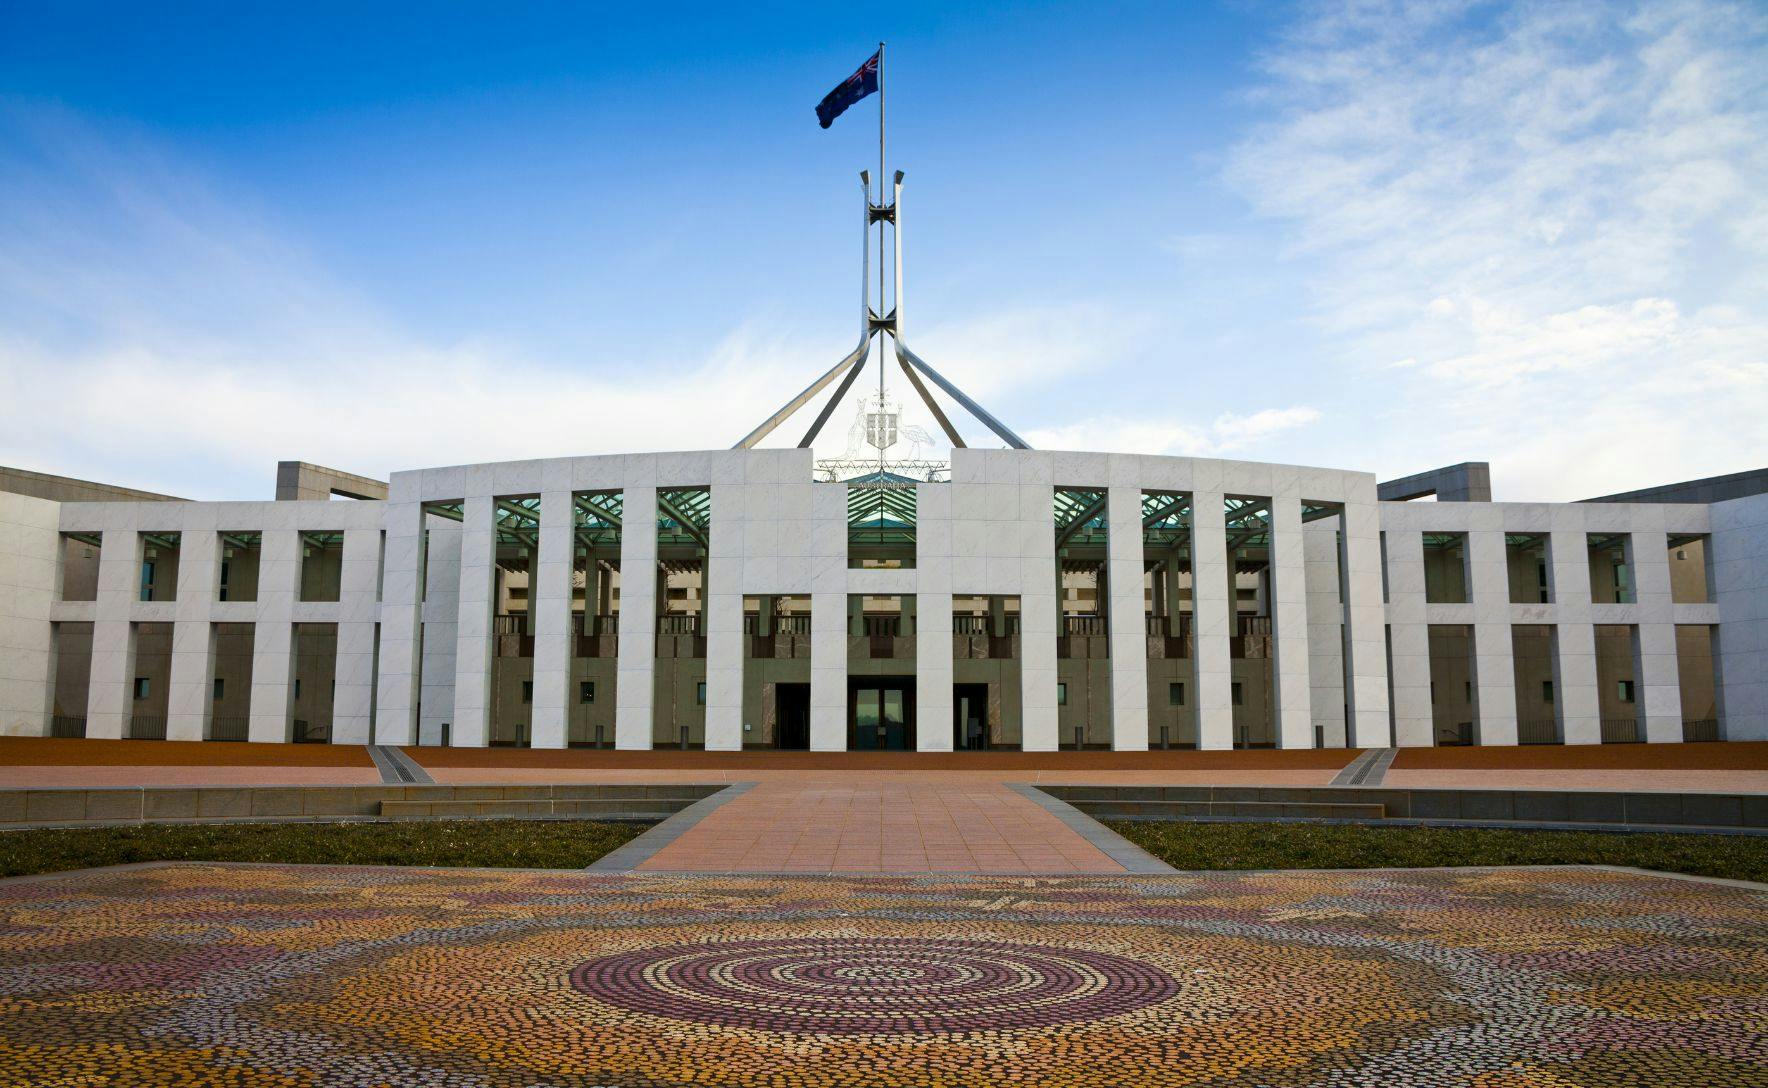 Parliament House with a mosaic on the forecourt.